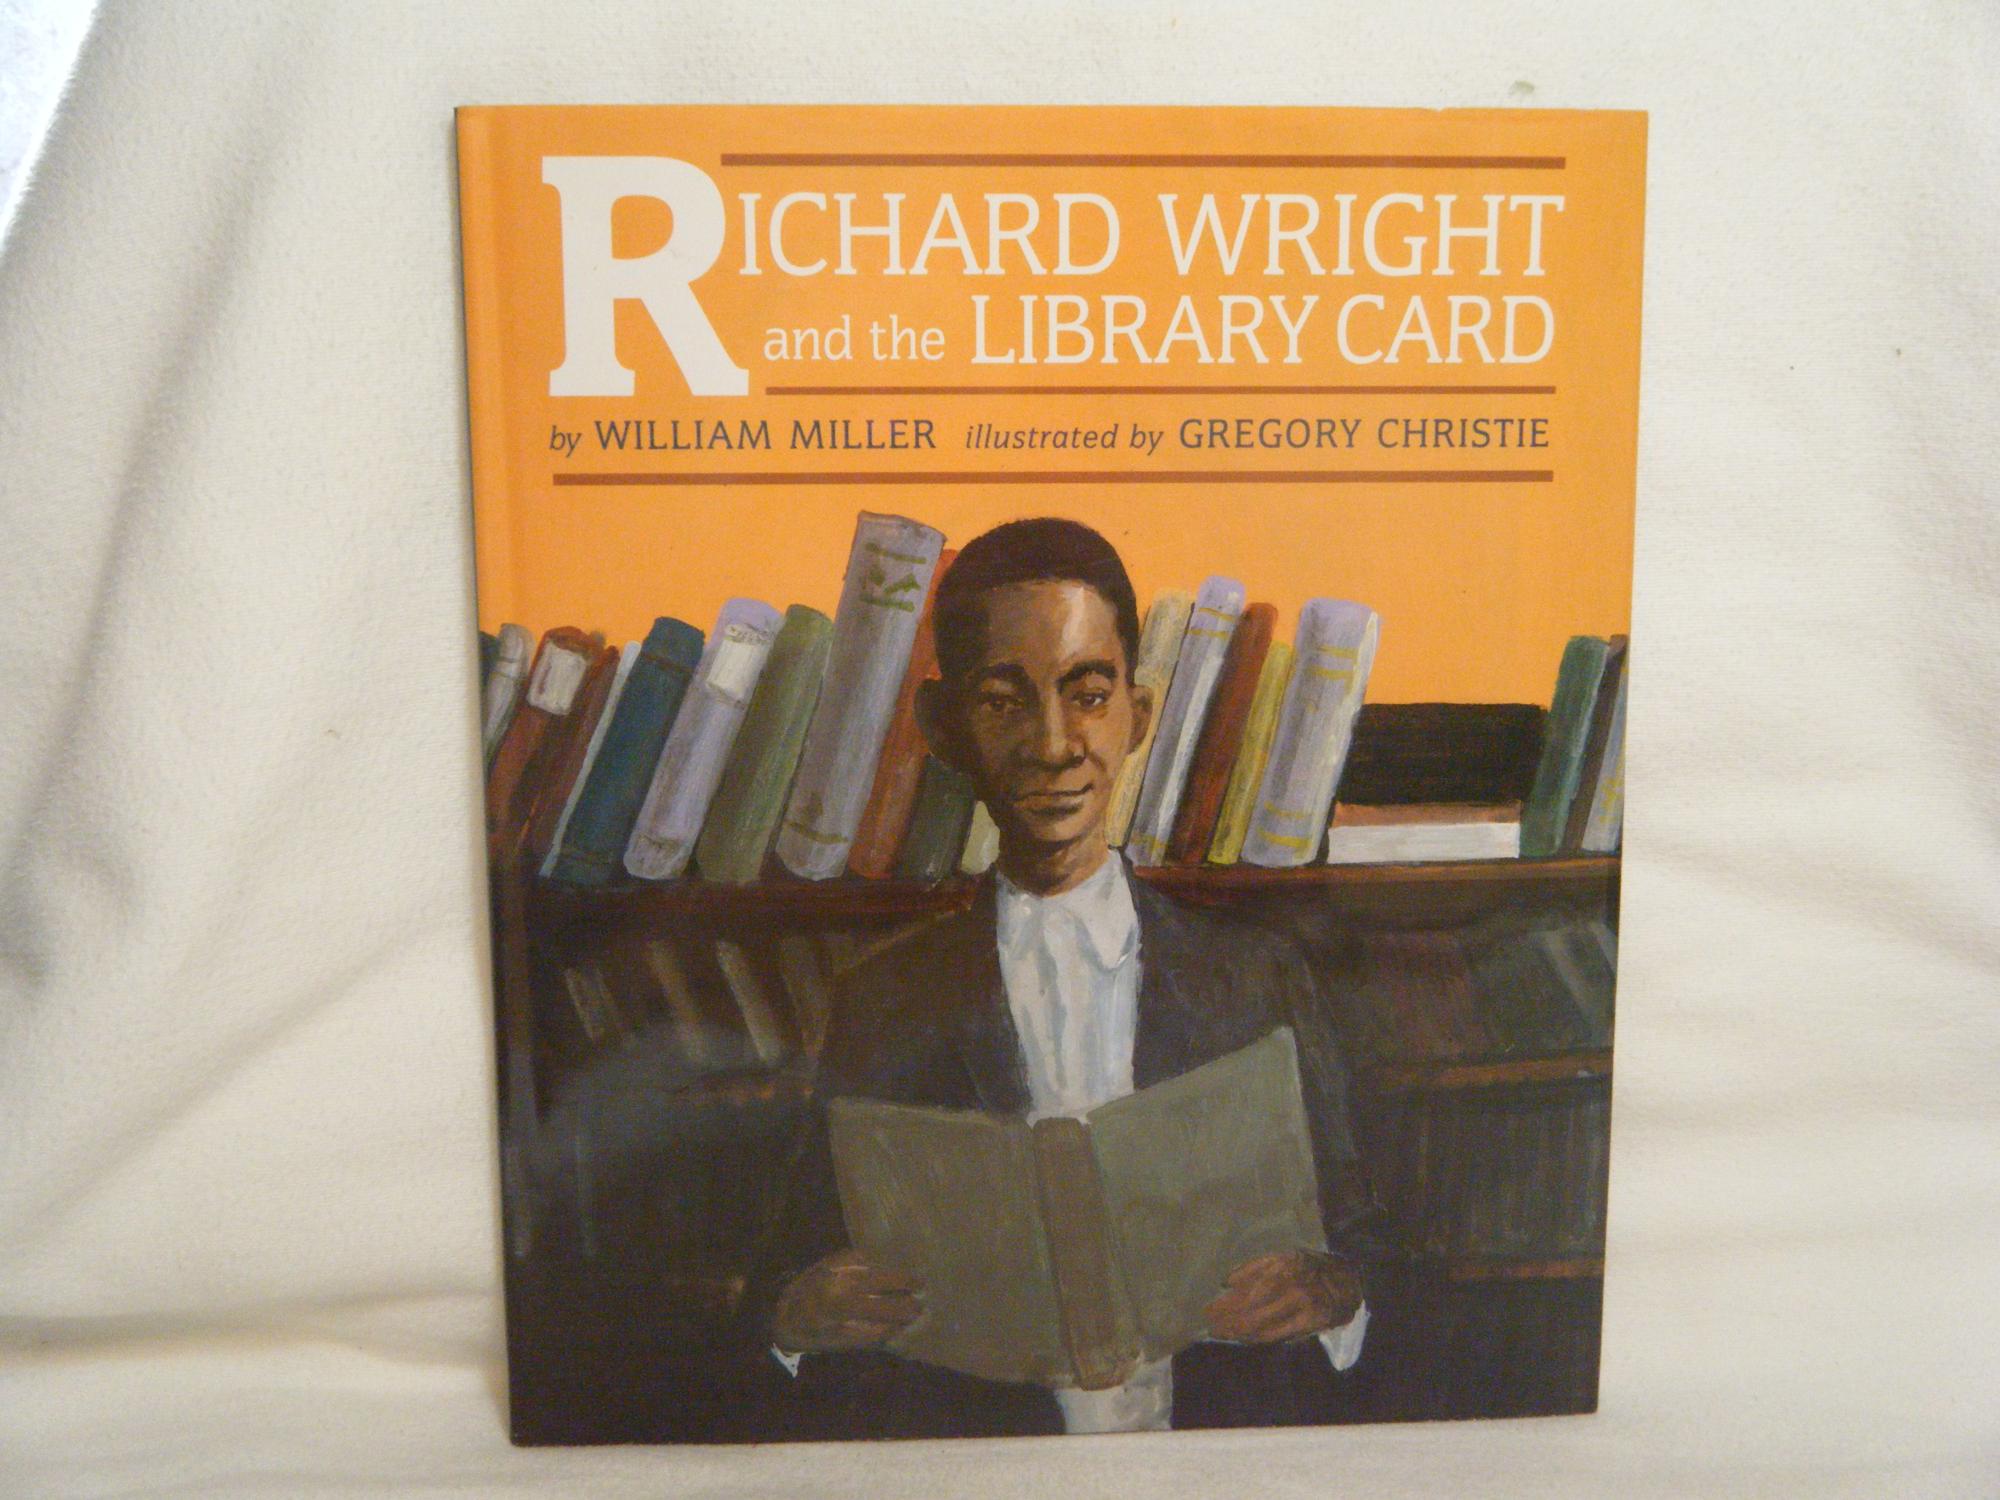 Essays about richard wrights library card